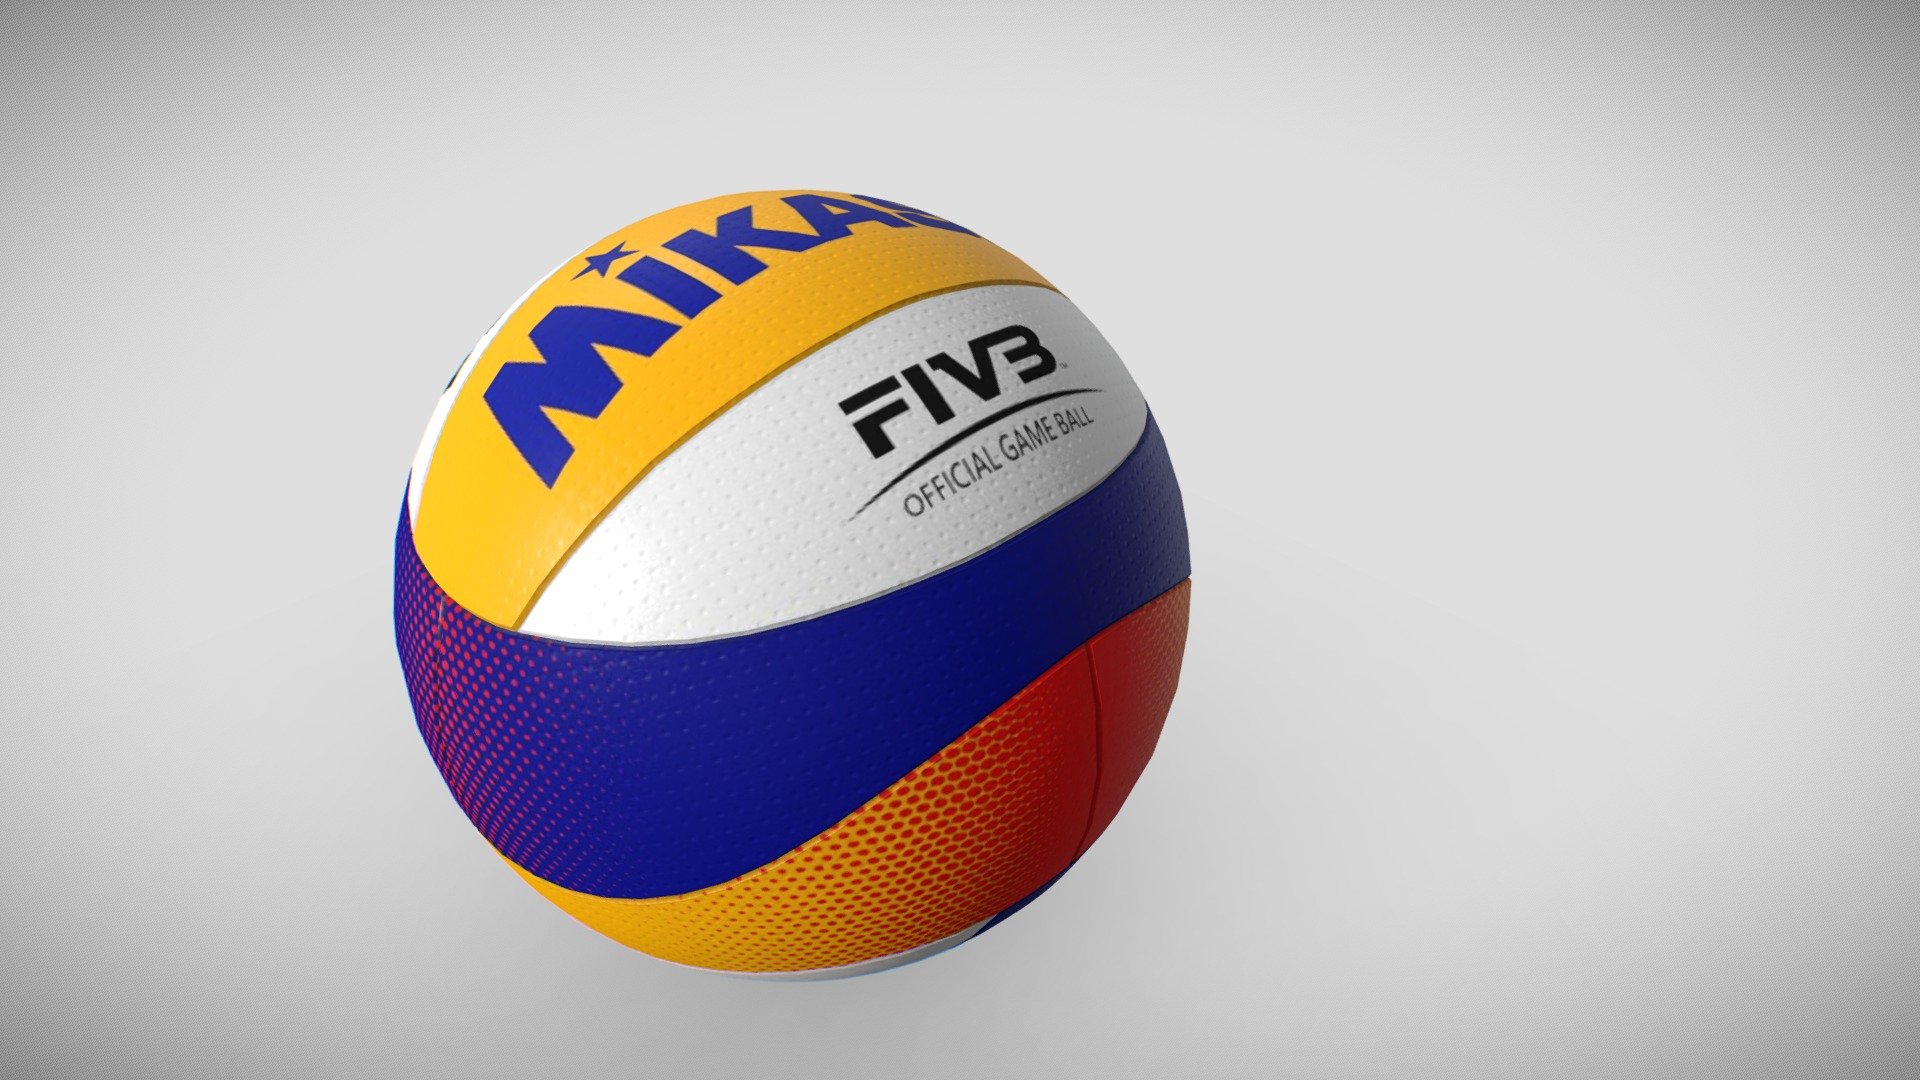 Ball Mikasa bv550c beach volleyball
I am fond of volleyball. And I decided to draw this ball, I wanted to draw this one based on the geometry and topology of the structure of this ball 3d model